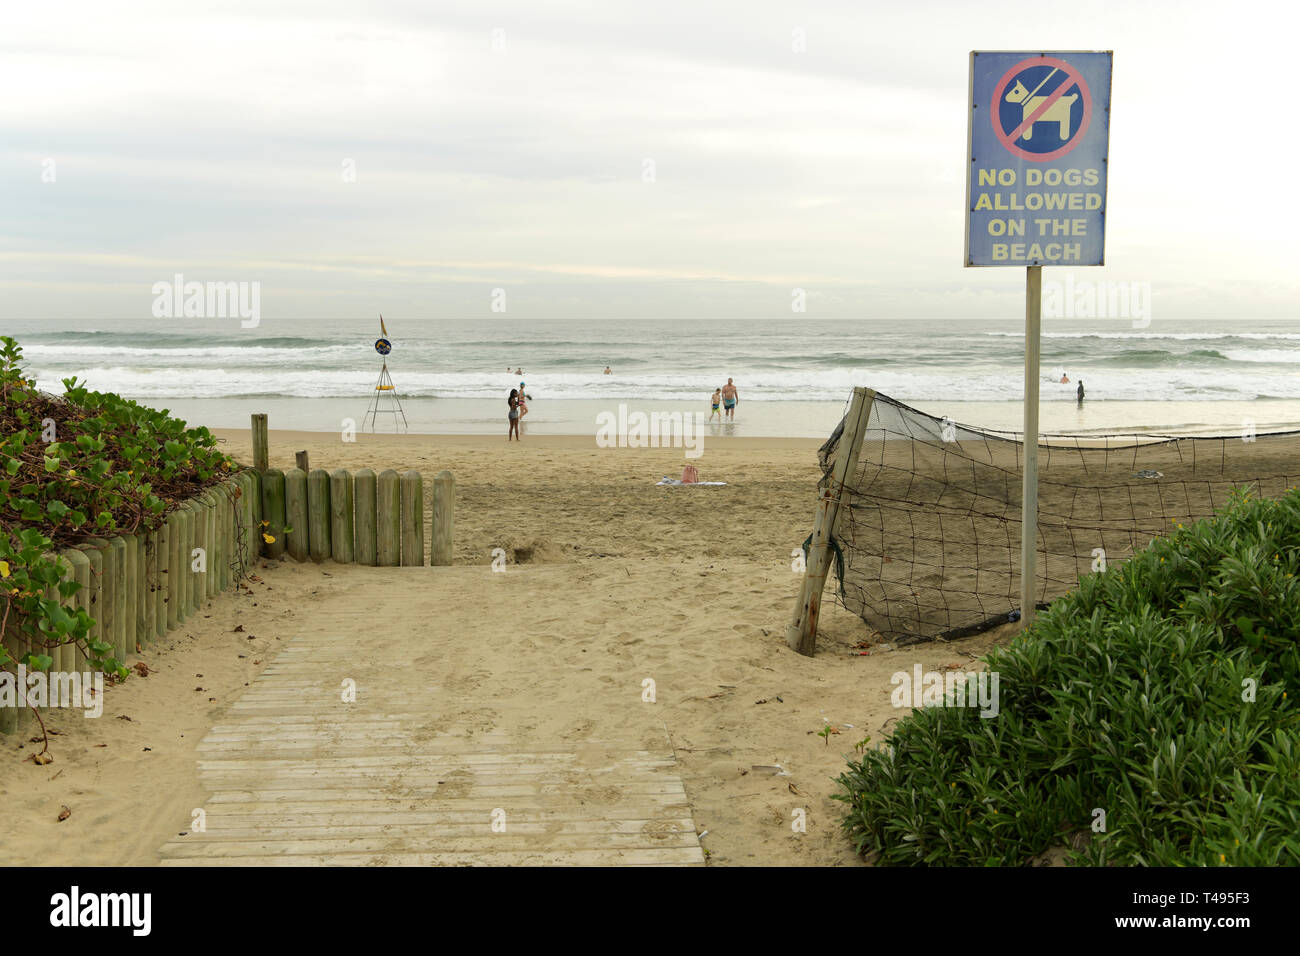 Durban, KwaZulu-Natal, South Africa, people swimming and relaxing at  Battery Beach, Golden Mile beachfront, no dogs allowed, landscape, city,  sign Stock Photo - Alamy